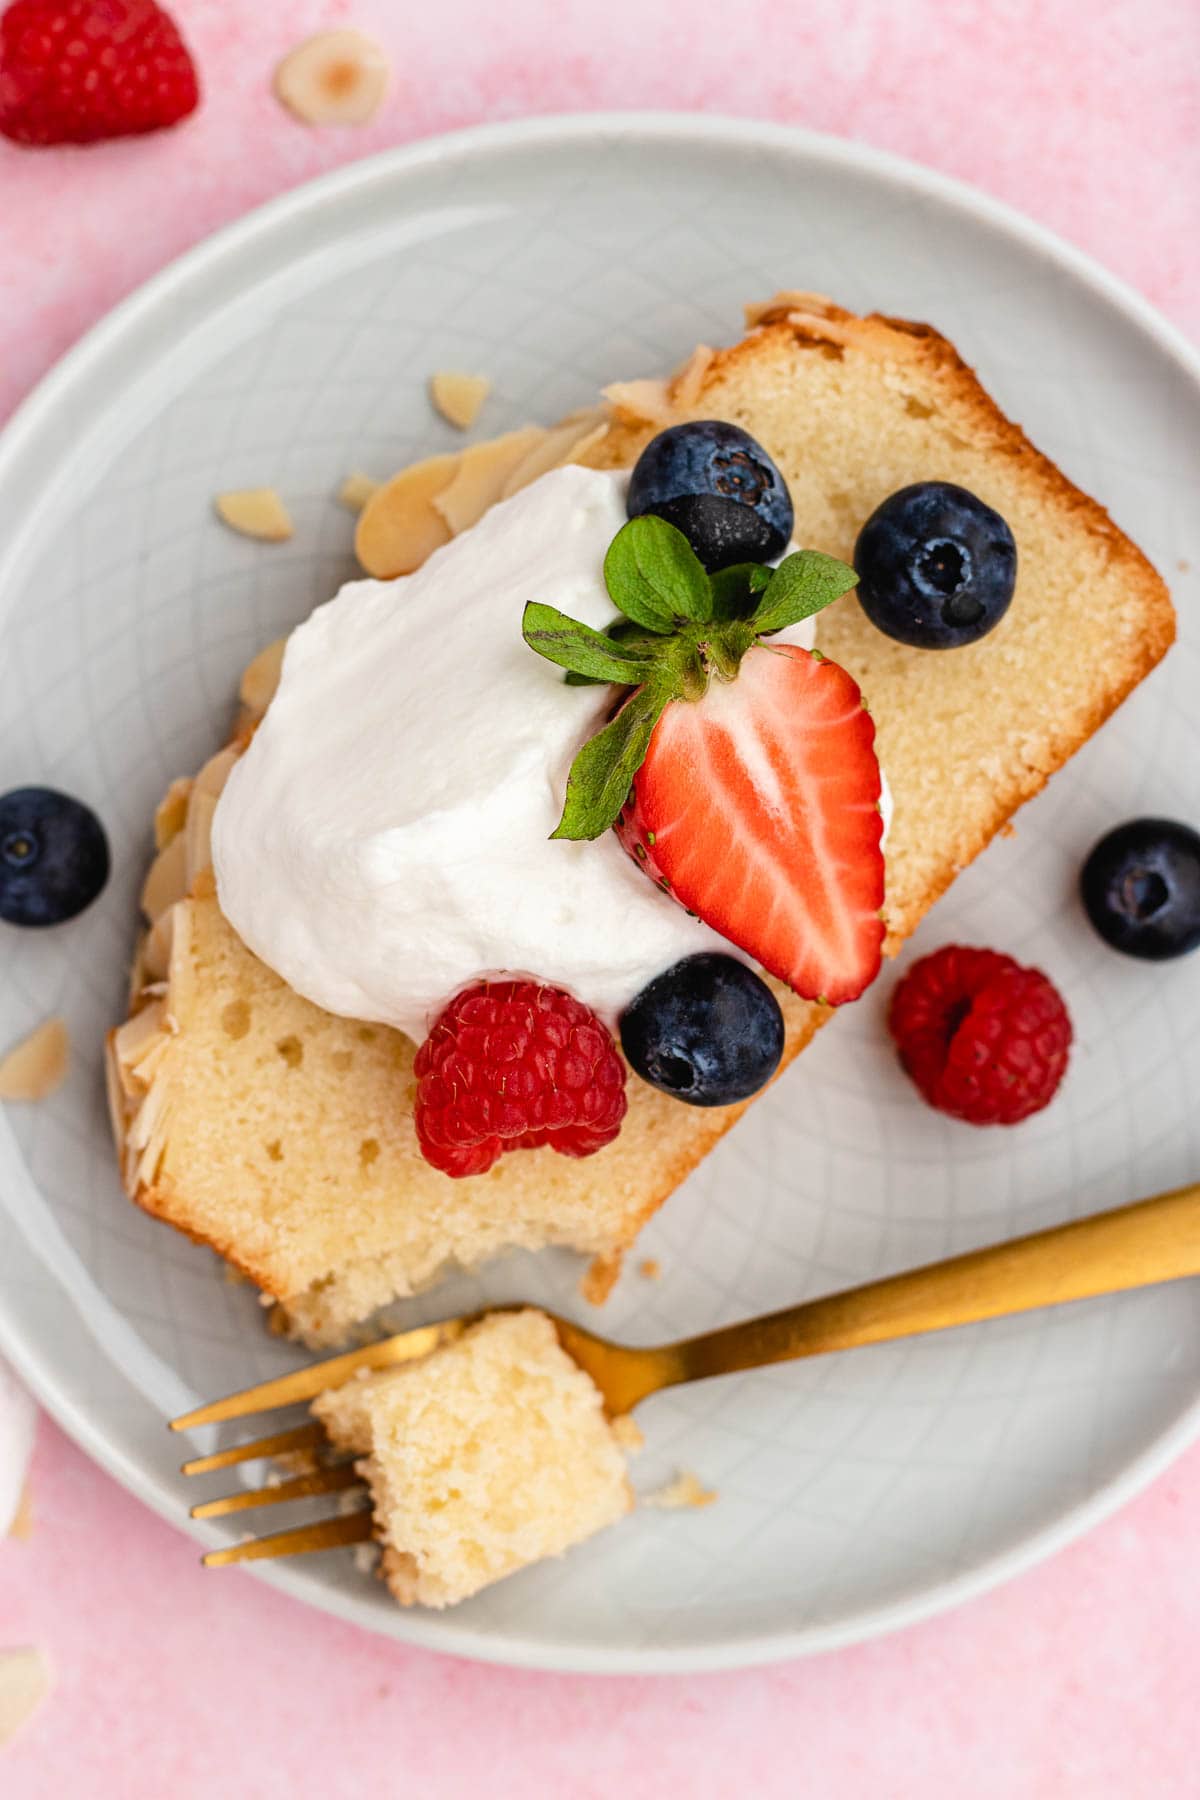 Almond Pound Cake slice on plate with whipped cream and berries on top and fork with bite.